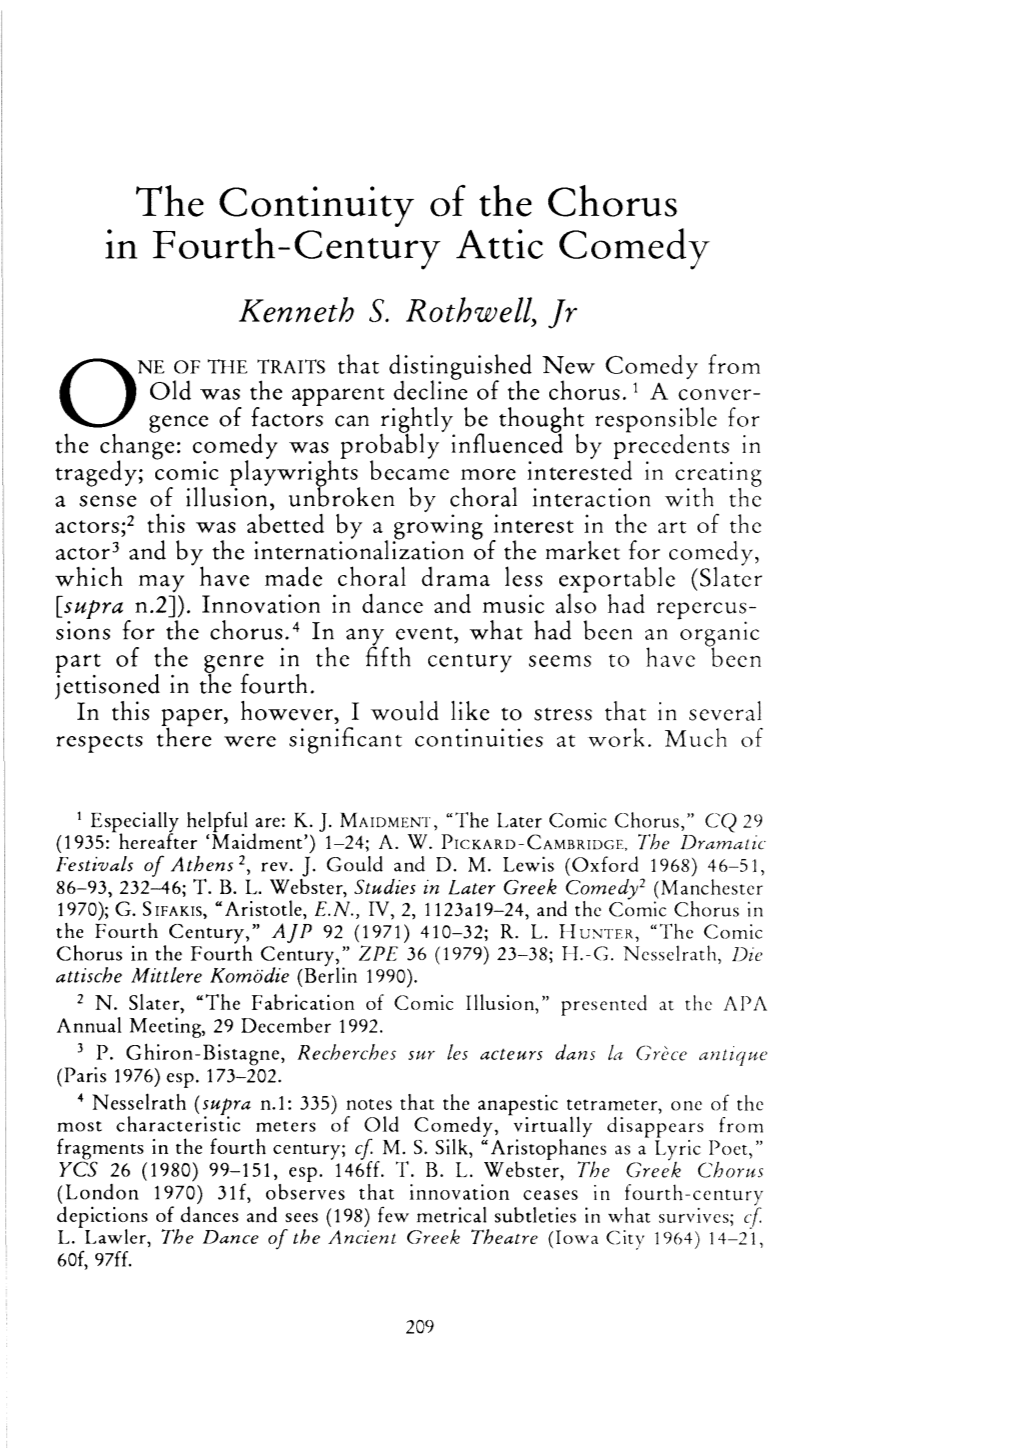 The Continuity of the Chorus in Fourth-Century Attic Comedy , Greek, Roman and Byzantine Studies, 33:3 (1992:Fall) P.209